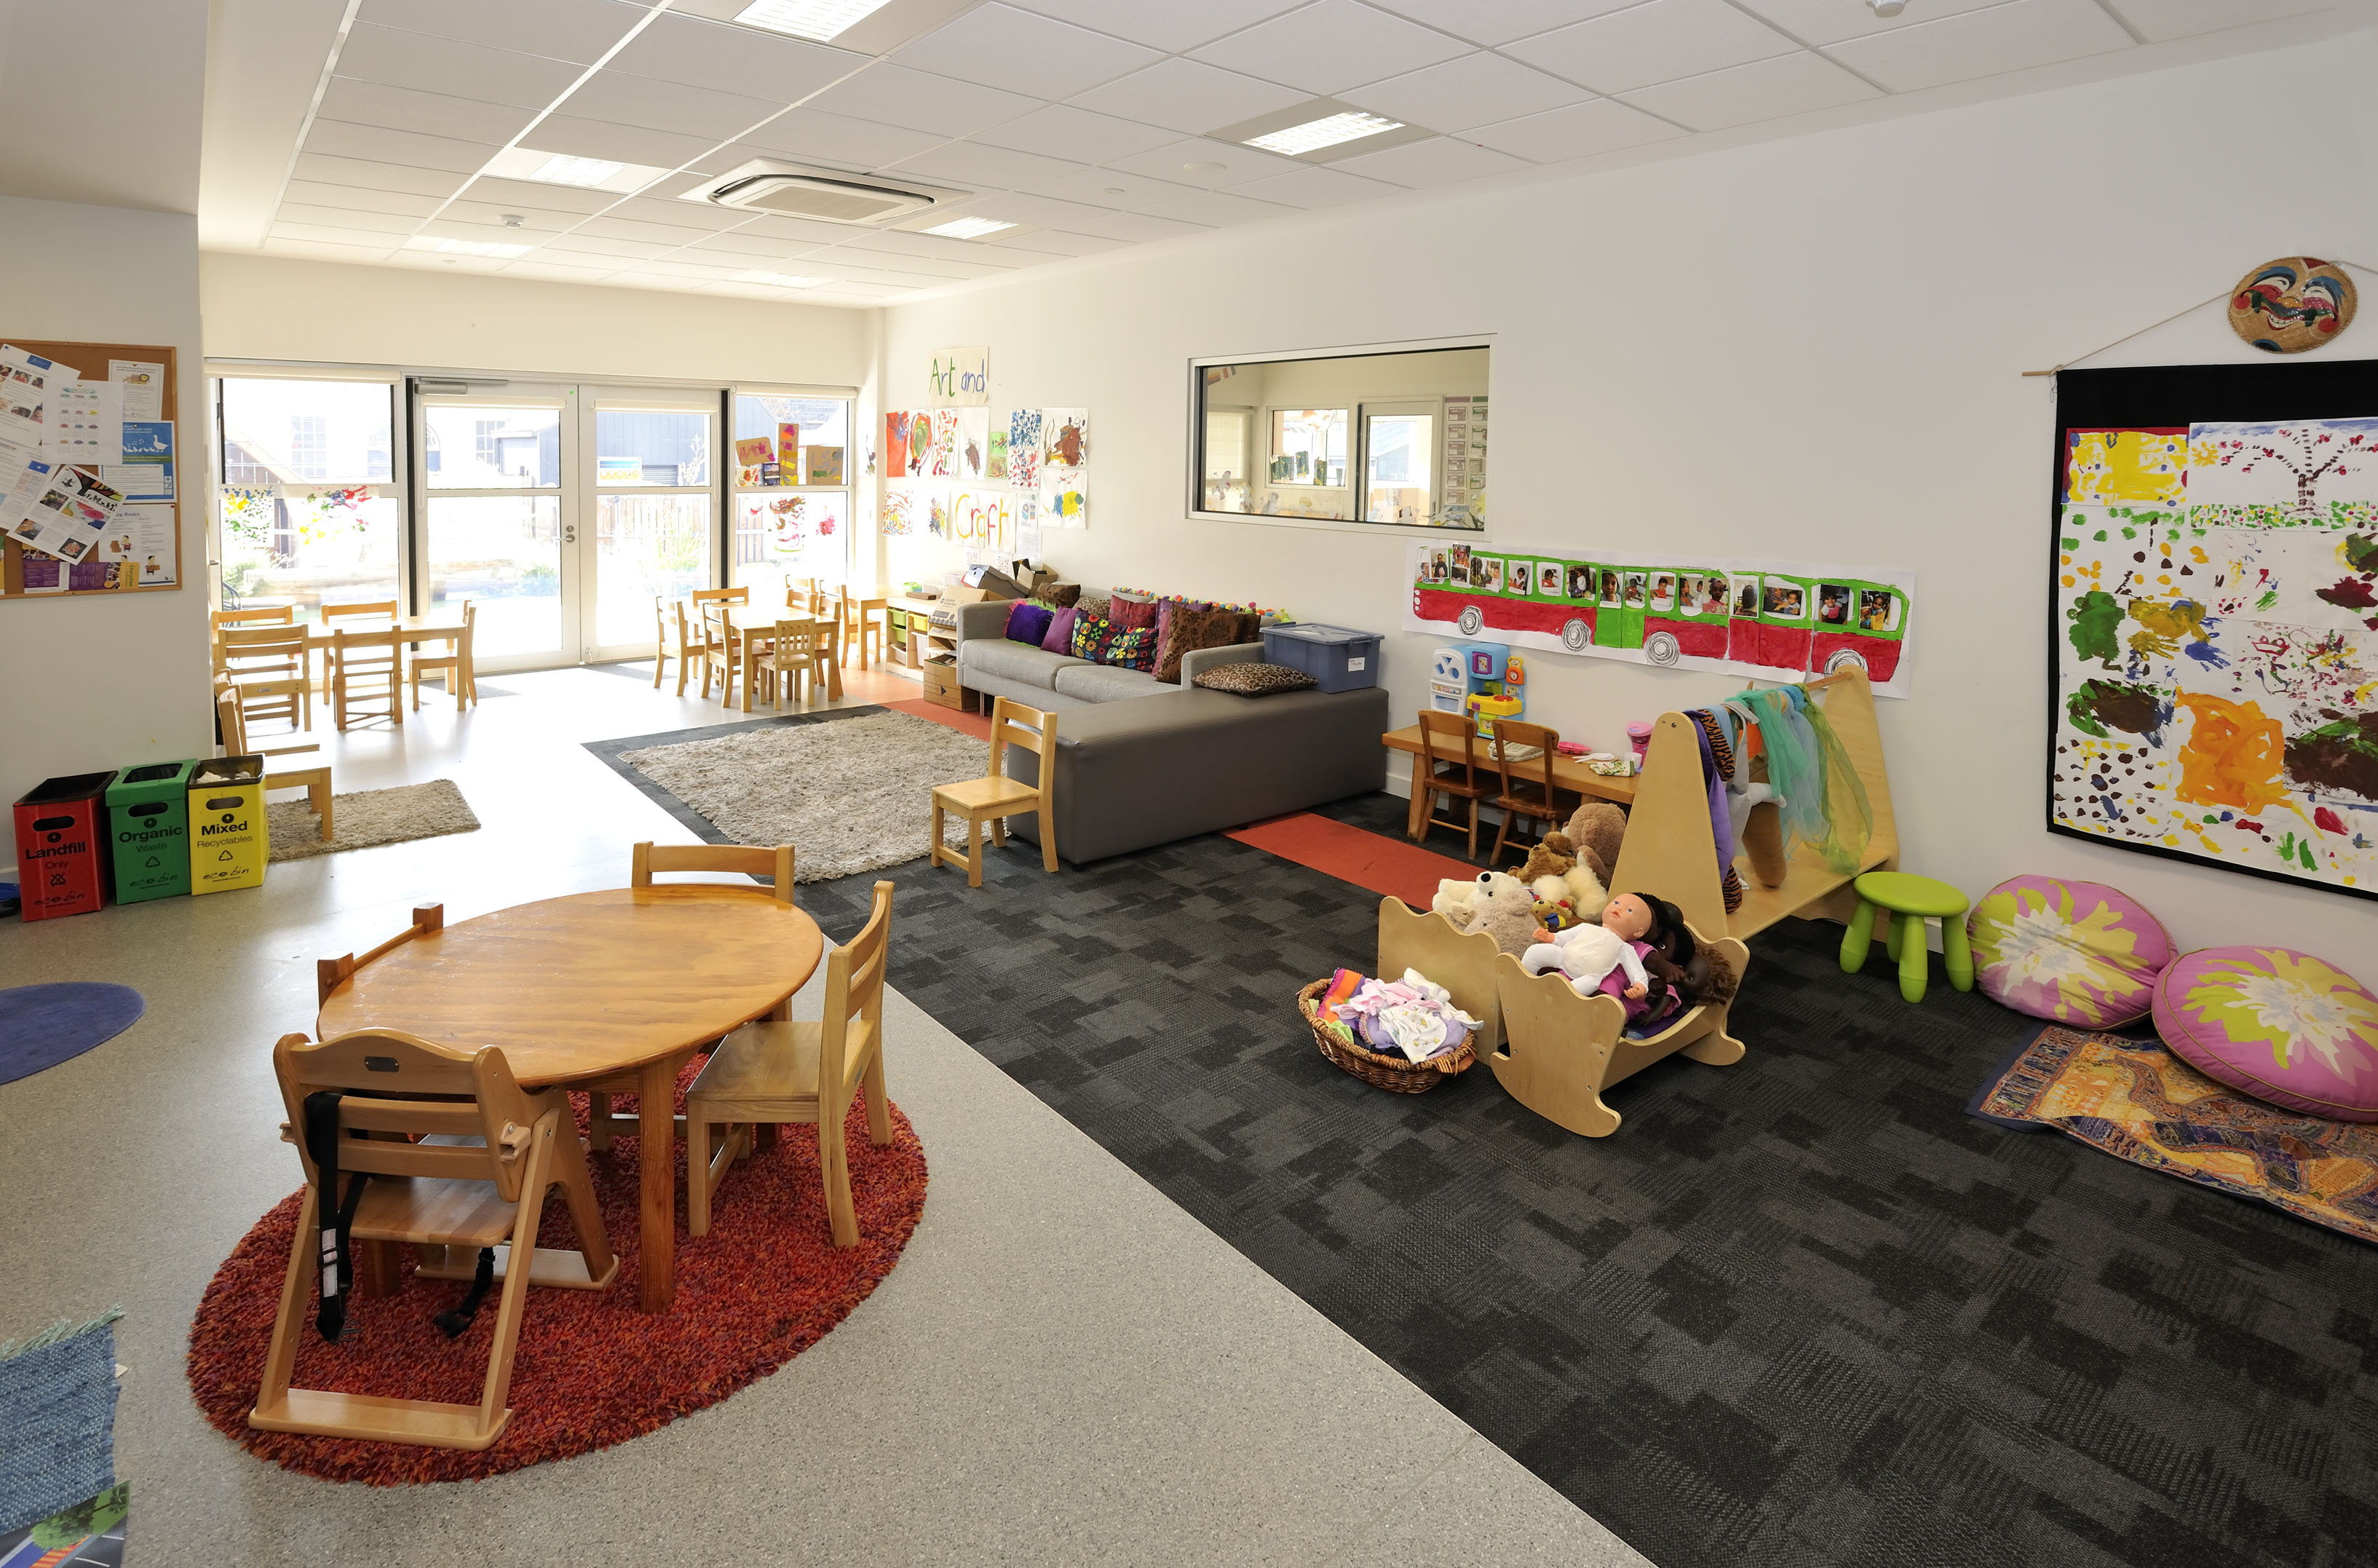 Image of the inside of the Connie Benn Centre playgroup room